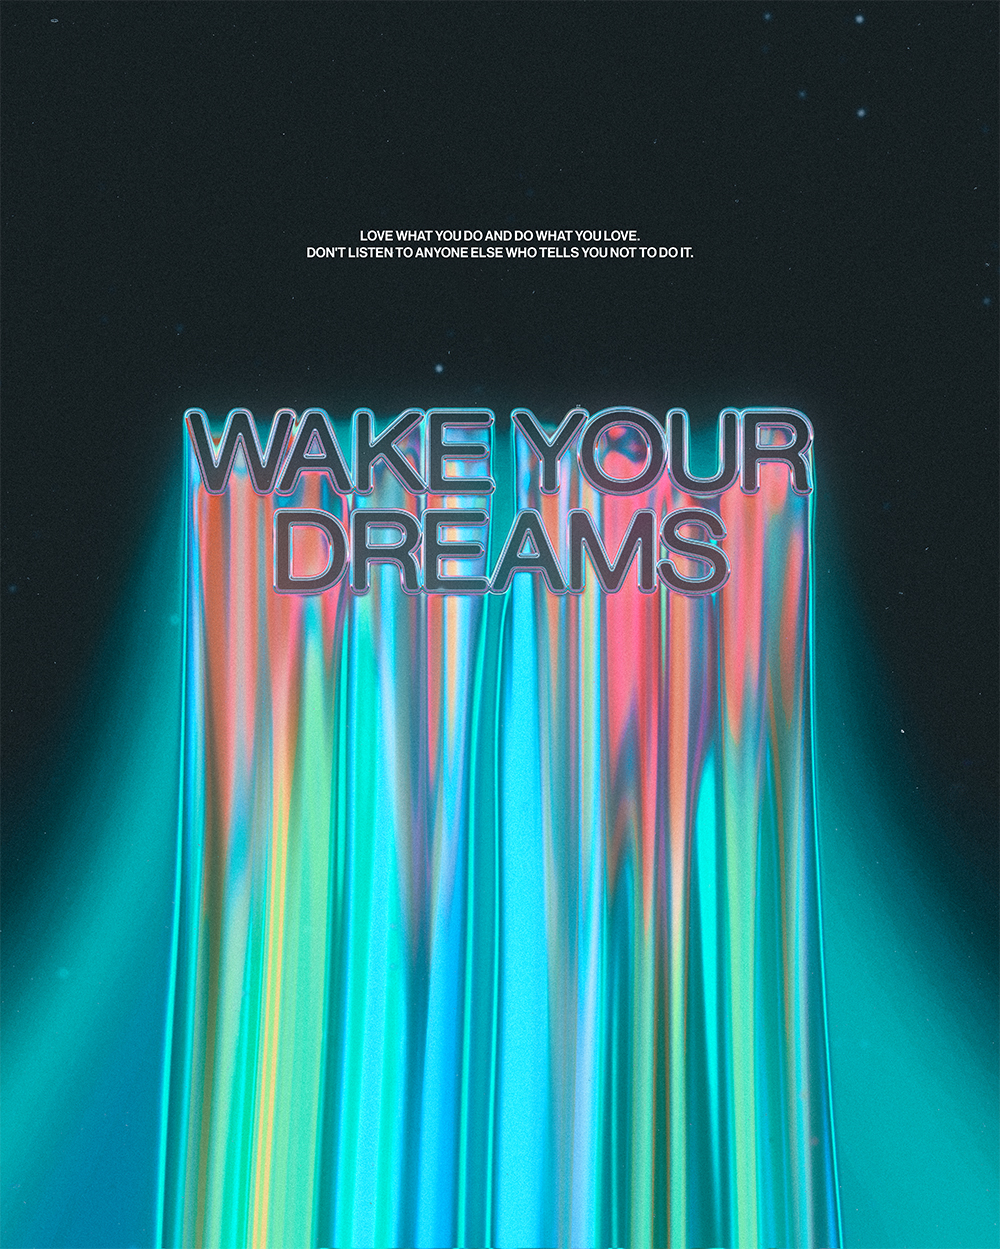 “Wake your dreams”